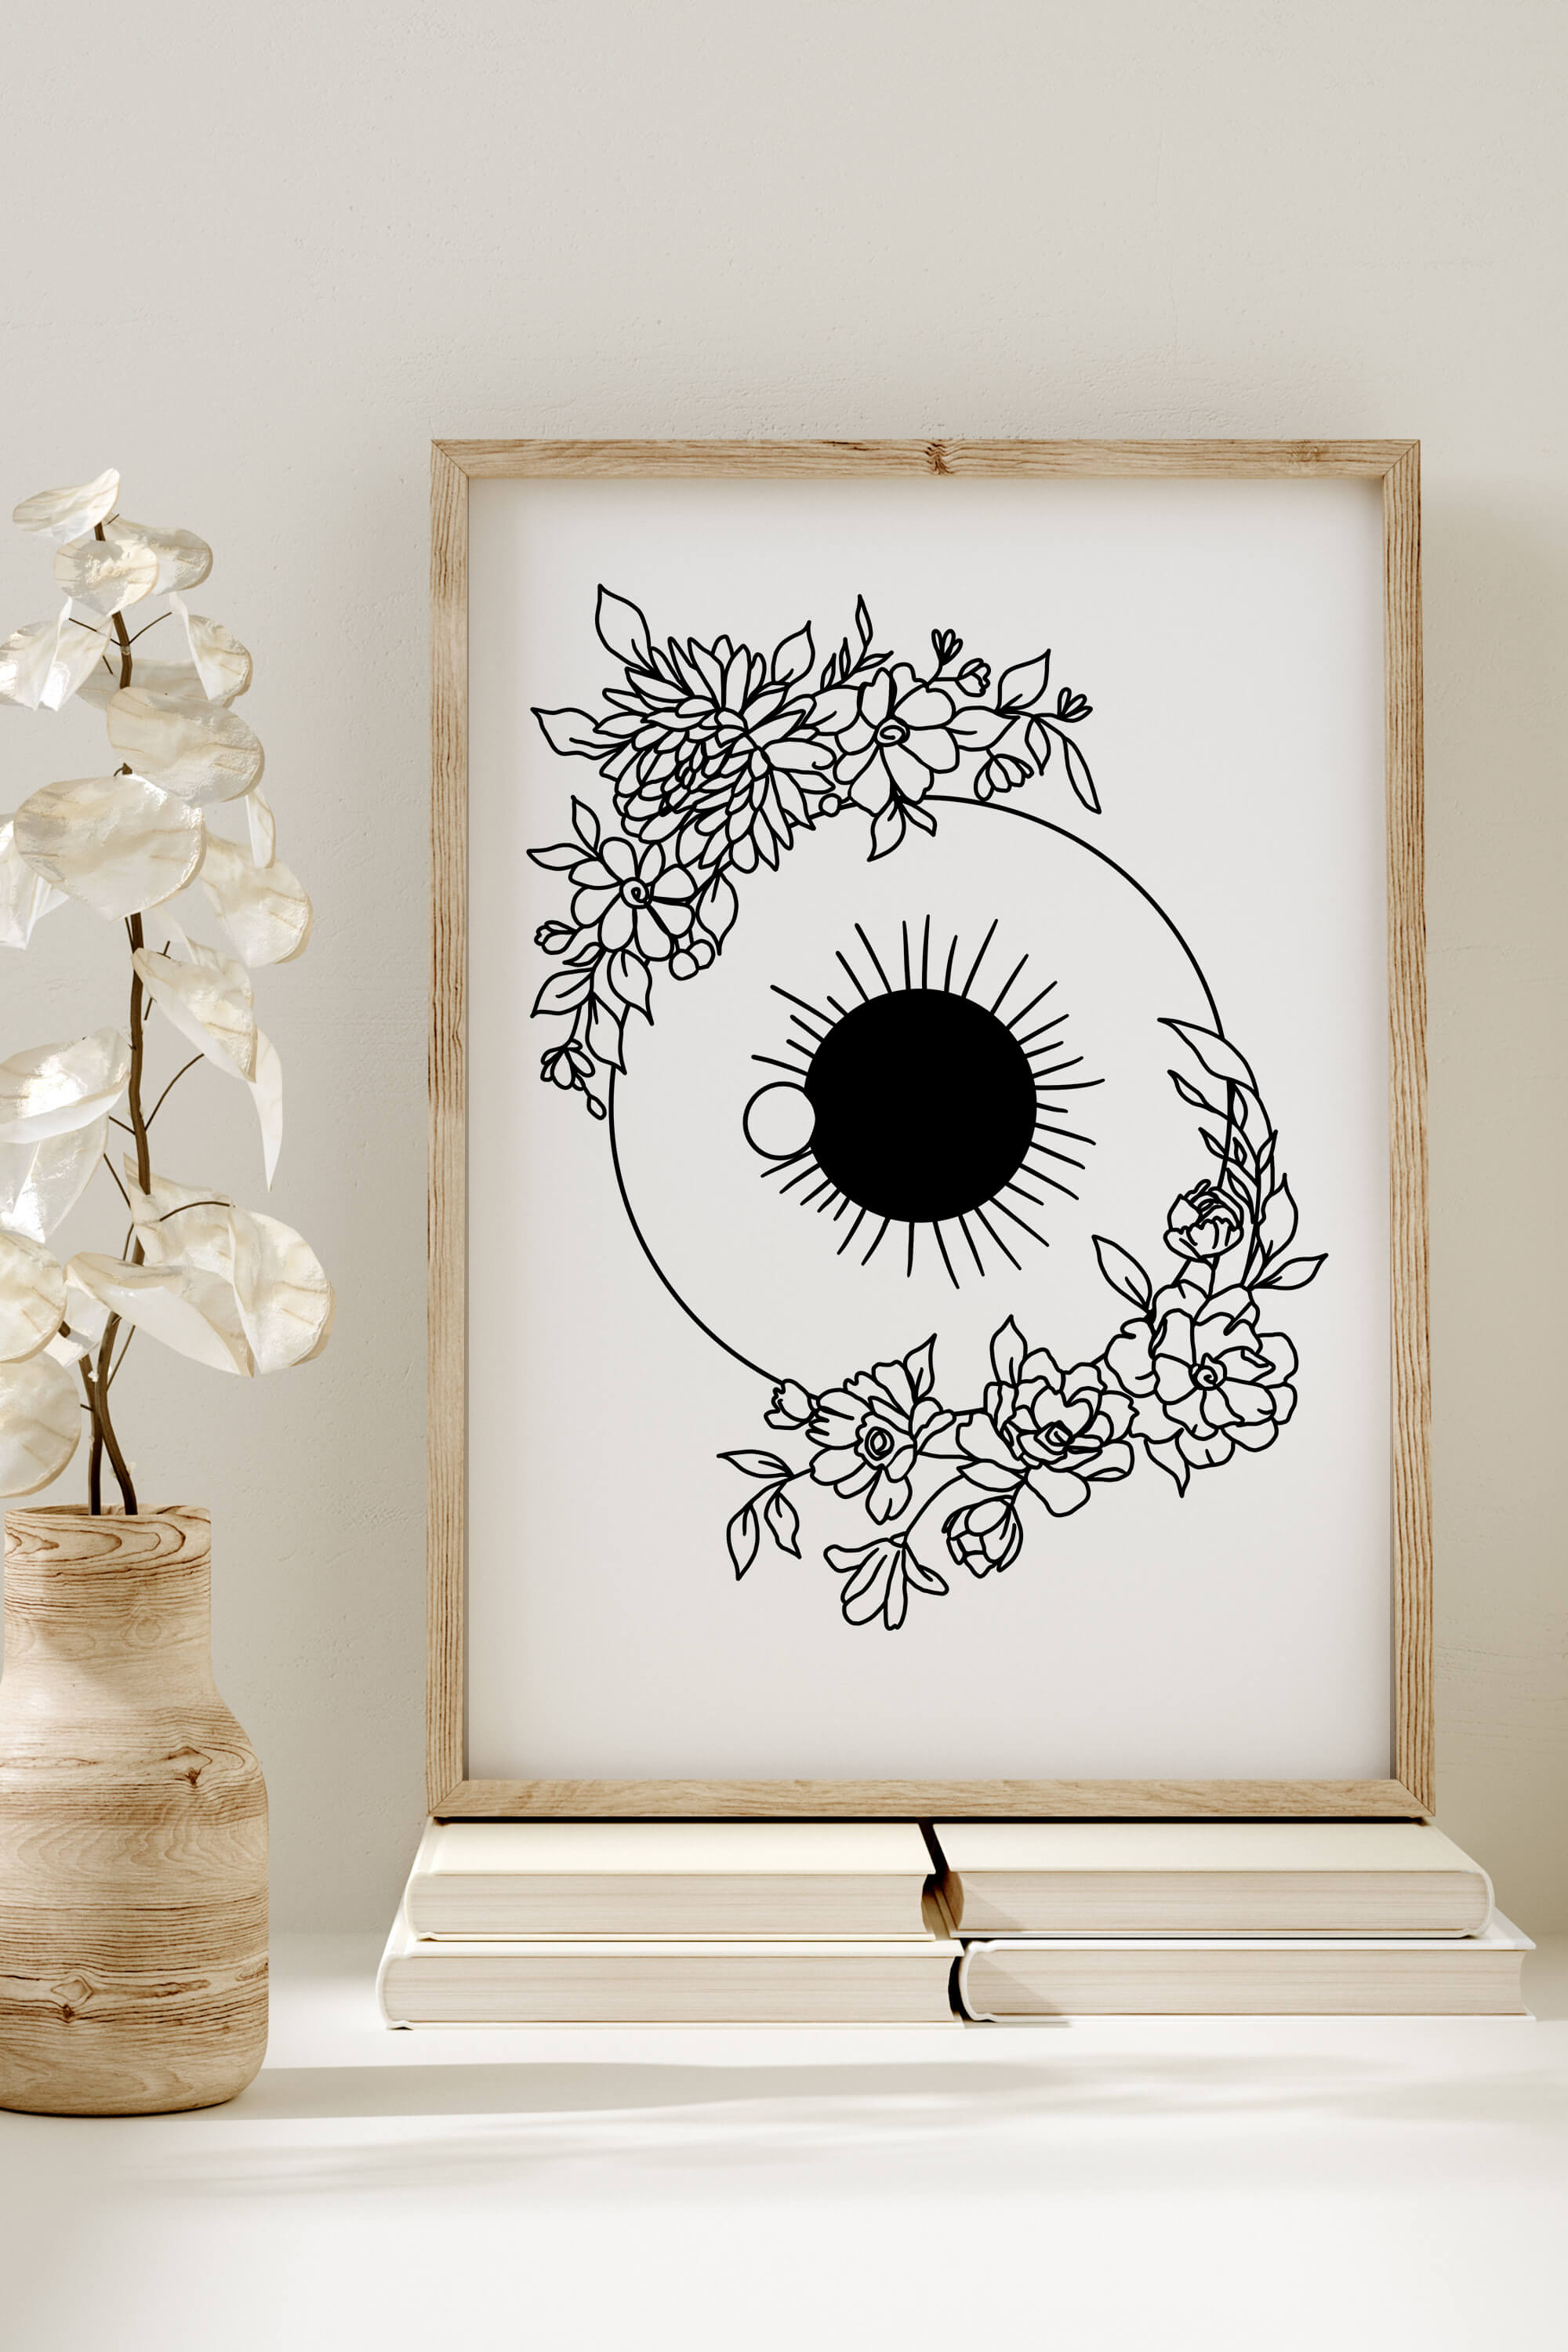 A thoughtful present for optometrists, this floral eye poster beautifully combines the elegance of flowers with the intricacies of eye anatomy.